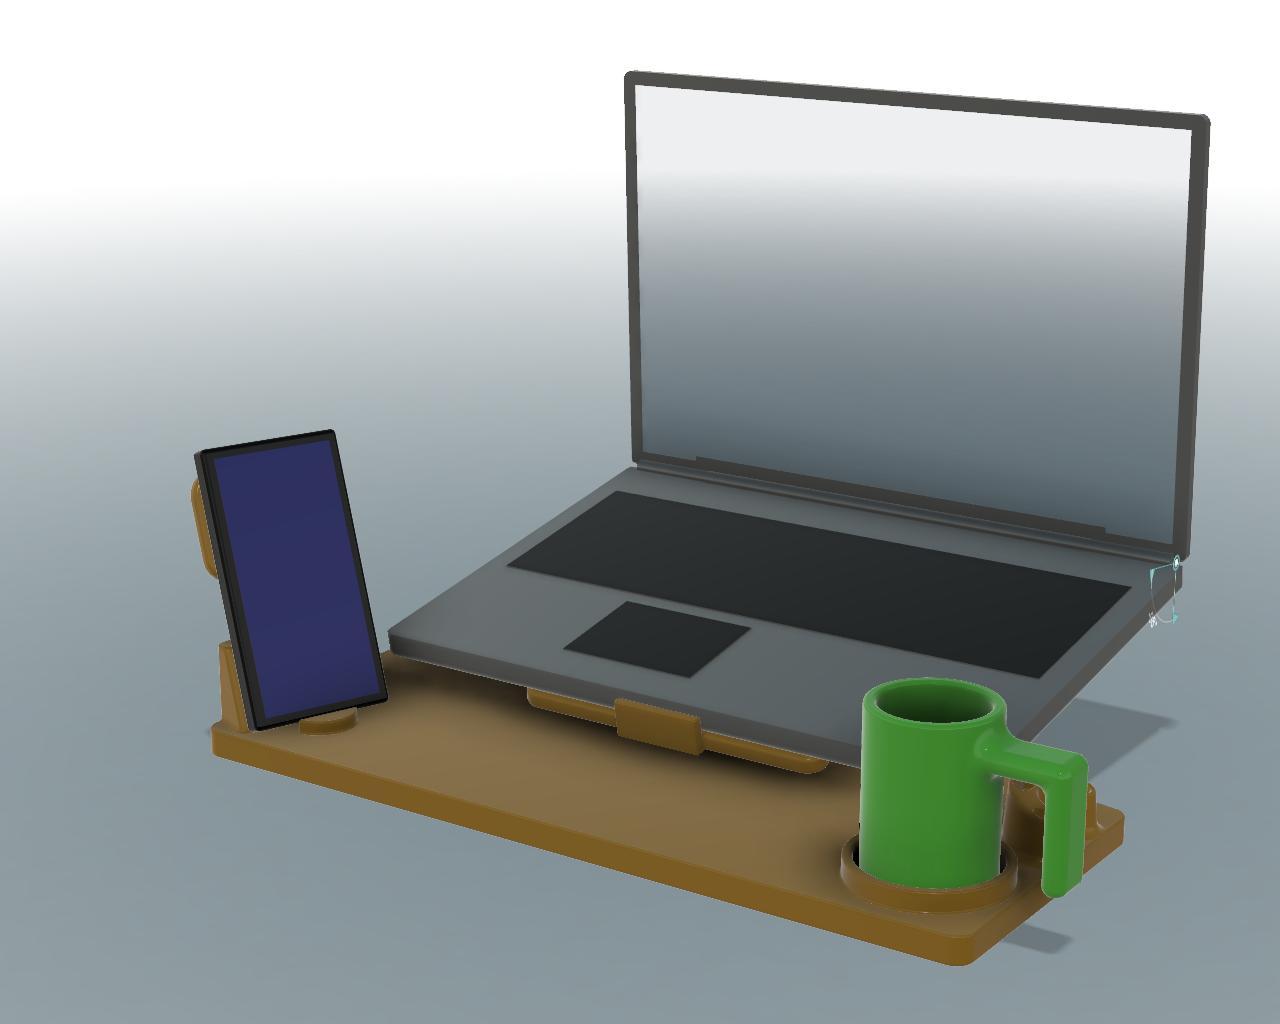 Lap Desk - Lap desk with laptop, mobile phone and a cup of coffee. The slightly raised laptop position gives a better view of the screen and reduces neck strain. - 3d model